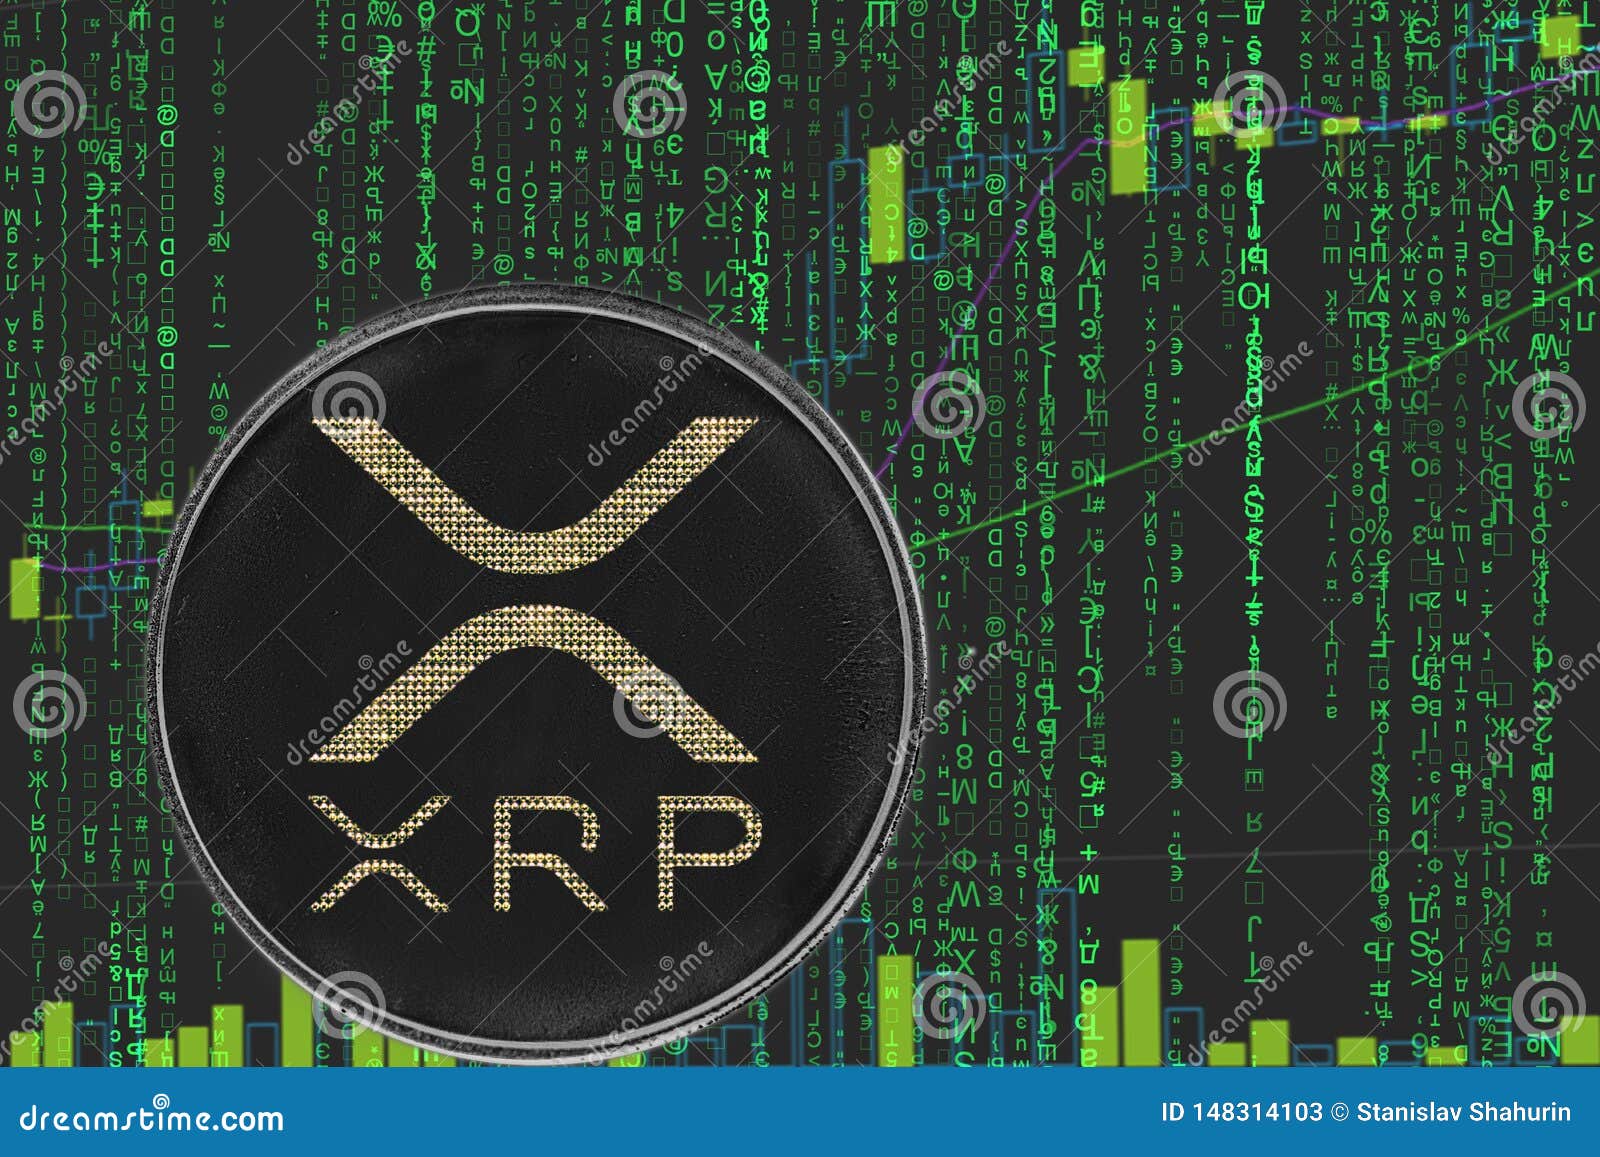 How To Buy Xrp In India / How to Buy Ripple (XRP) / Xrp is available to buy in india.